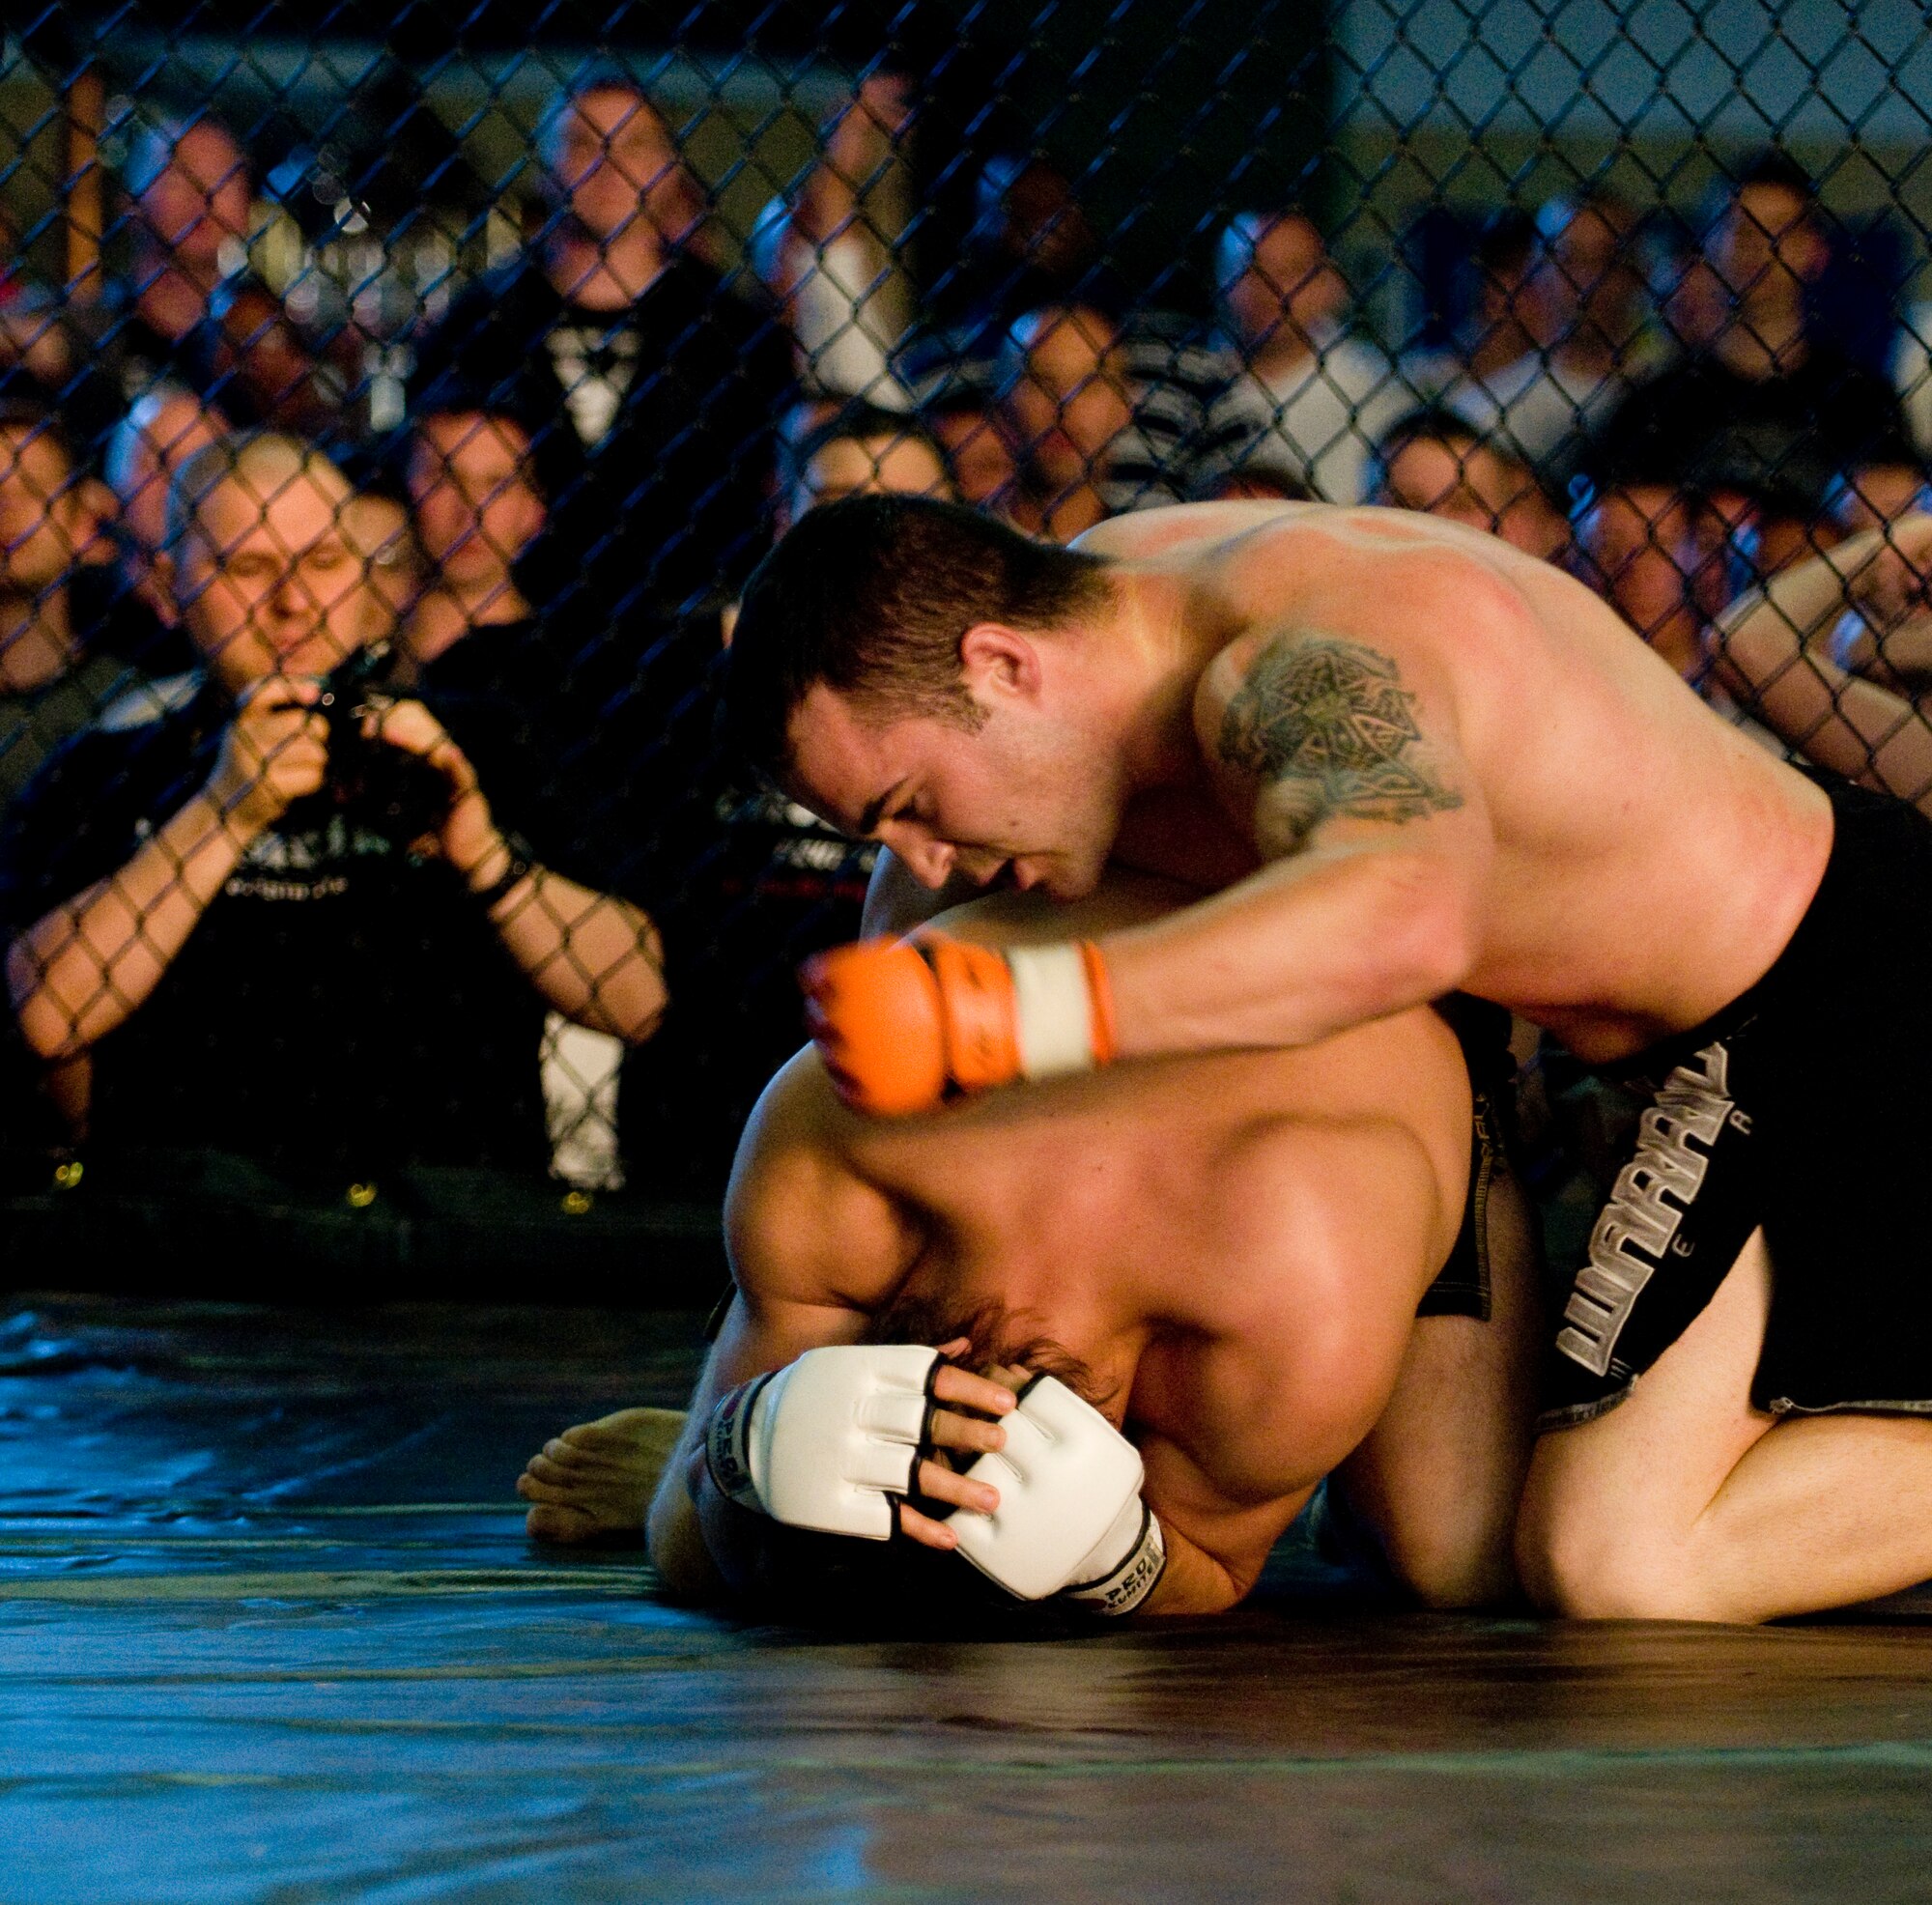 Brandon Kilfoyle of Team Catacomb delivers strike after strike on the back of Benjamin Cigliutto of France, giving him the win with a technical knockout in 3 minutes and 19 seconds in the first round of his debut fight, July 11, 2009, Baumholder, Germany.  Kilfoyle is a staff sergeant with the 786th Security Forces Squadron at Sembach Annex, Germany. (U.S. Air Force photo by Senior Airman Nathan Lipscomb)